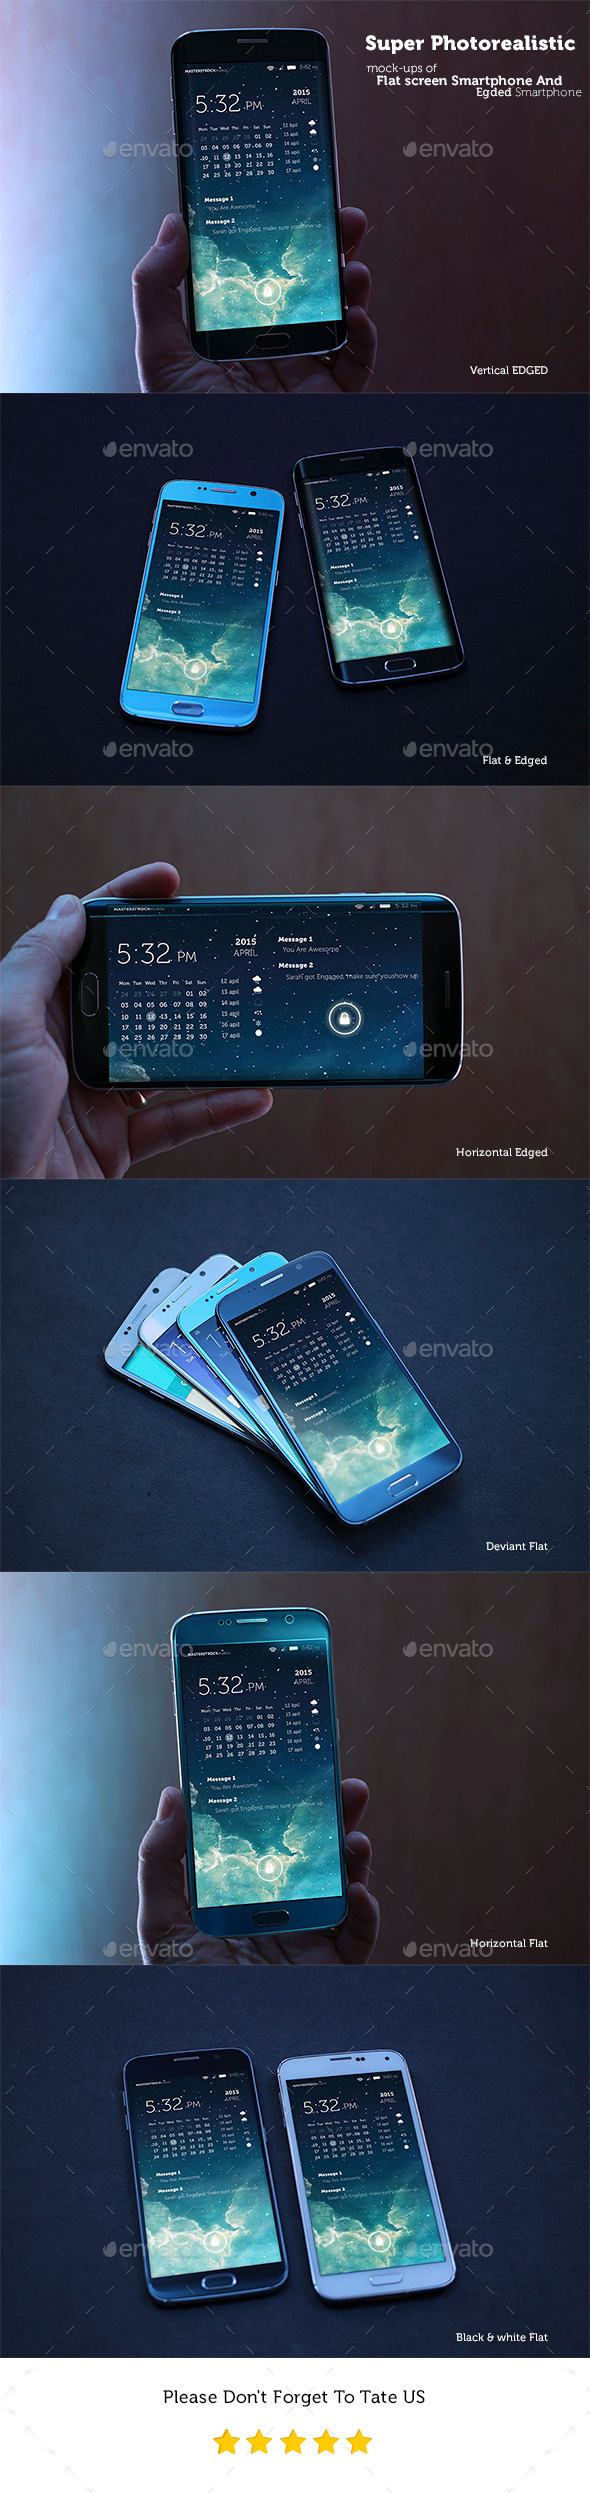 Photorealistic Mobile Mockups - Flat And Edged